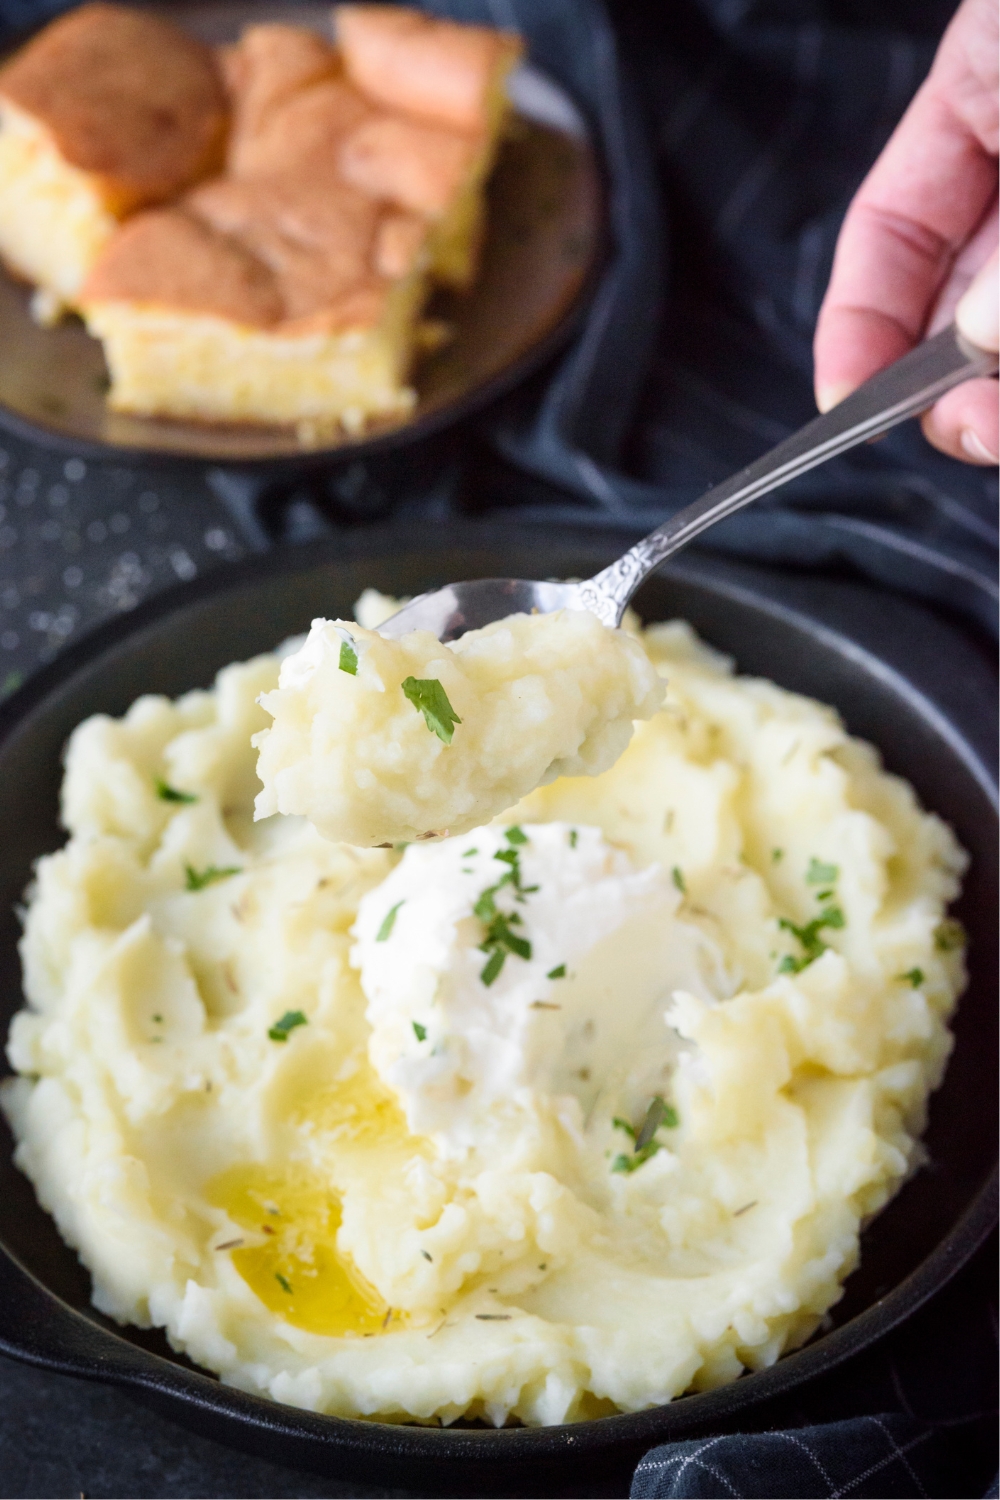 A hand holding a spoon scooping mashed potatoes out of a black bowl. The potatoes are topped with sour cream and butter.